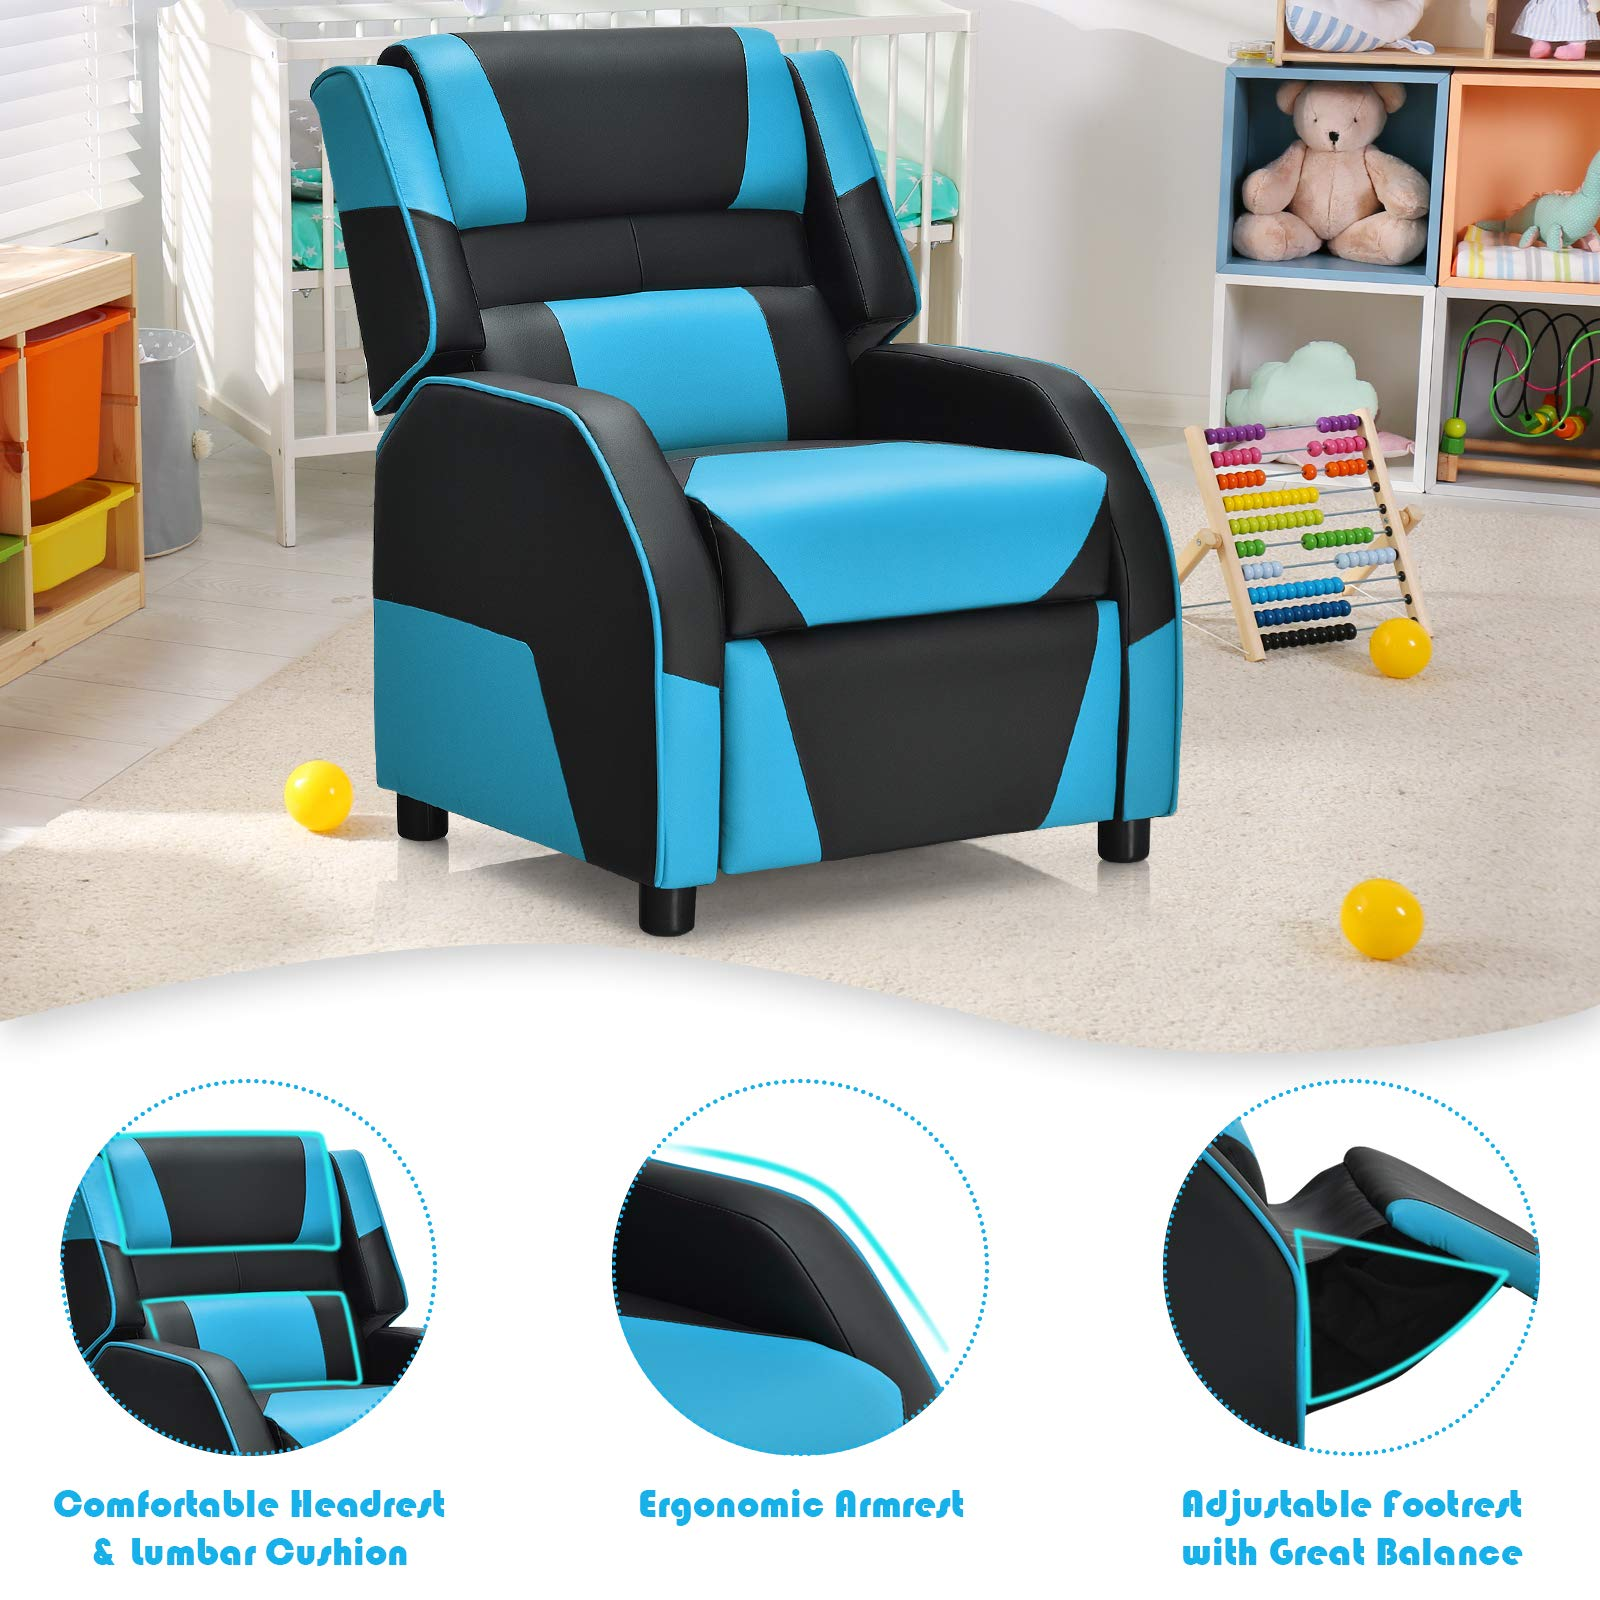 Costzon Kids Recliner, Gaming Recliner Chair w/Side Pockets, Footrest,  Headrest & Lumbar Support for Kids Room & Play Room, Adjustable Racing  Style Leather Sofa for Children Boys Girls (Blue, Black) – Built